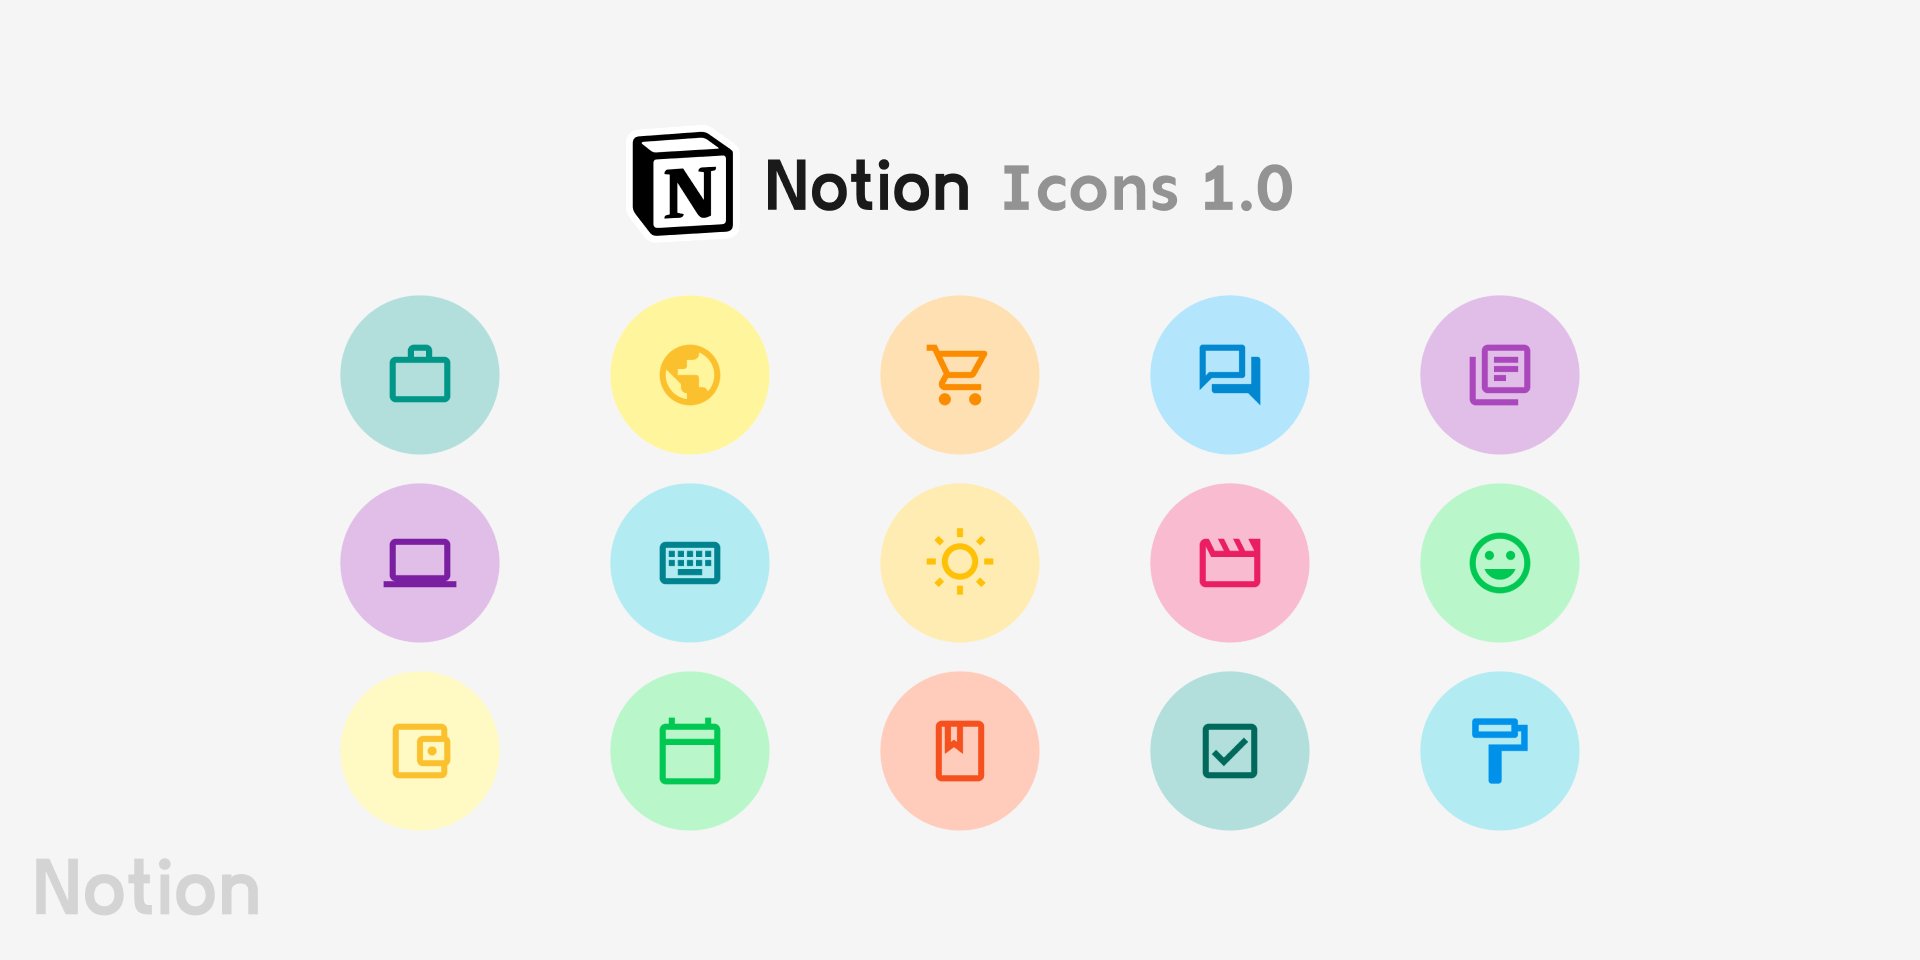 Notion Icons 1.0